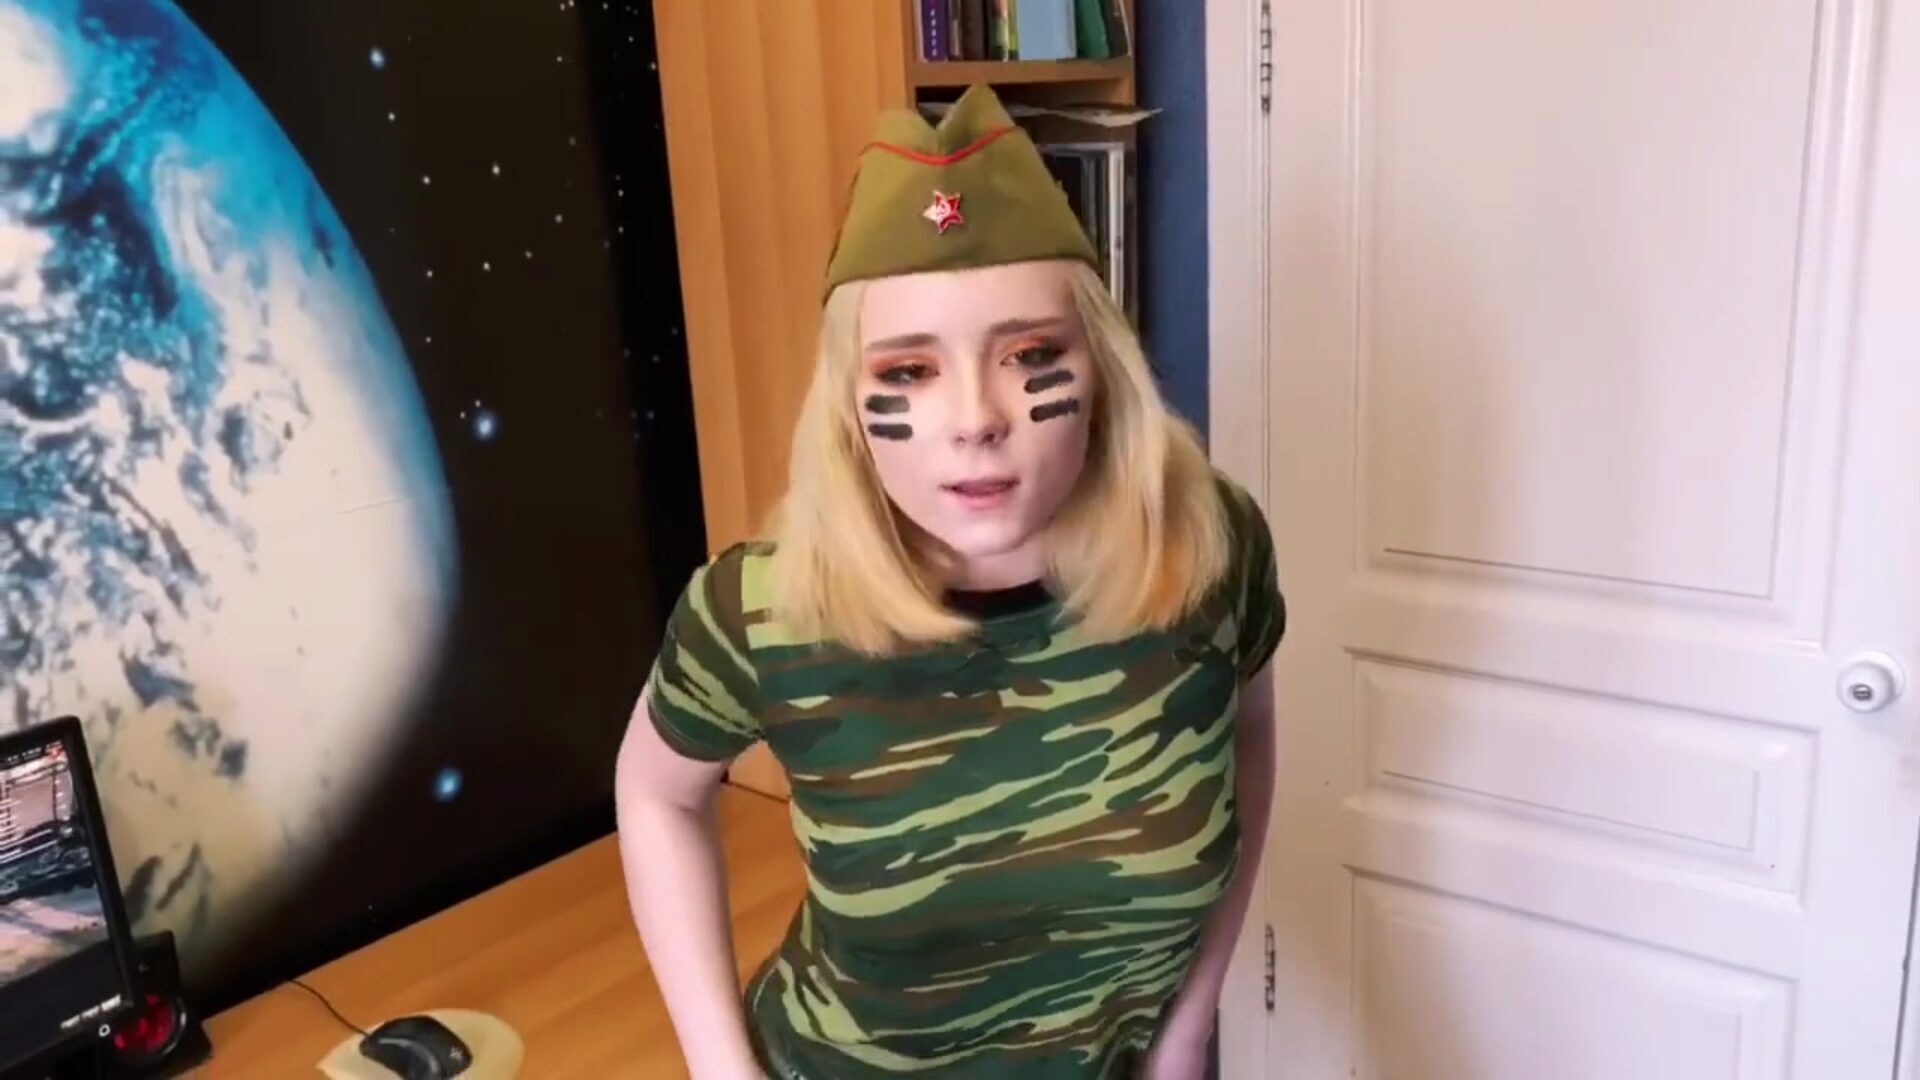 Sweetie Fox Mastutbating and Sucking Dildo in Military Outfit - SOLO